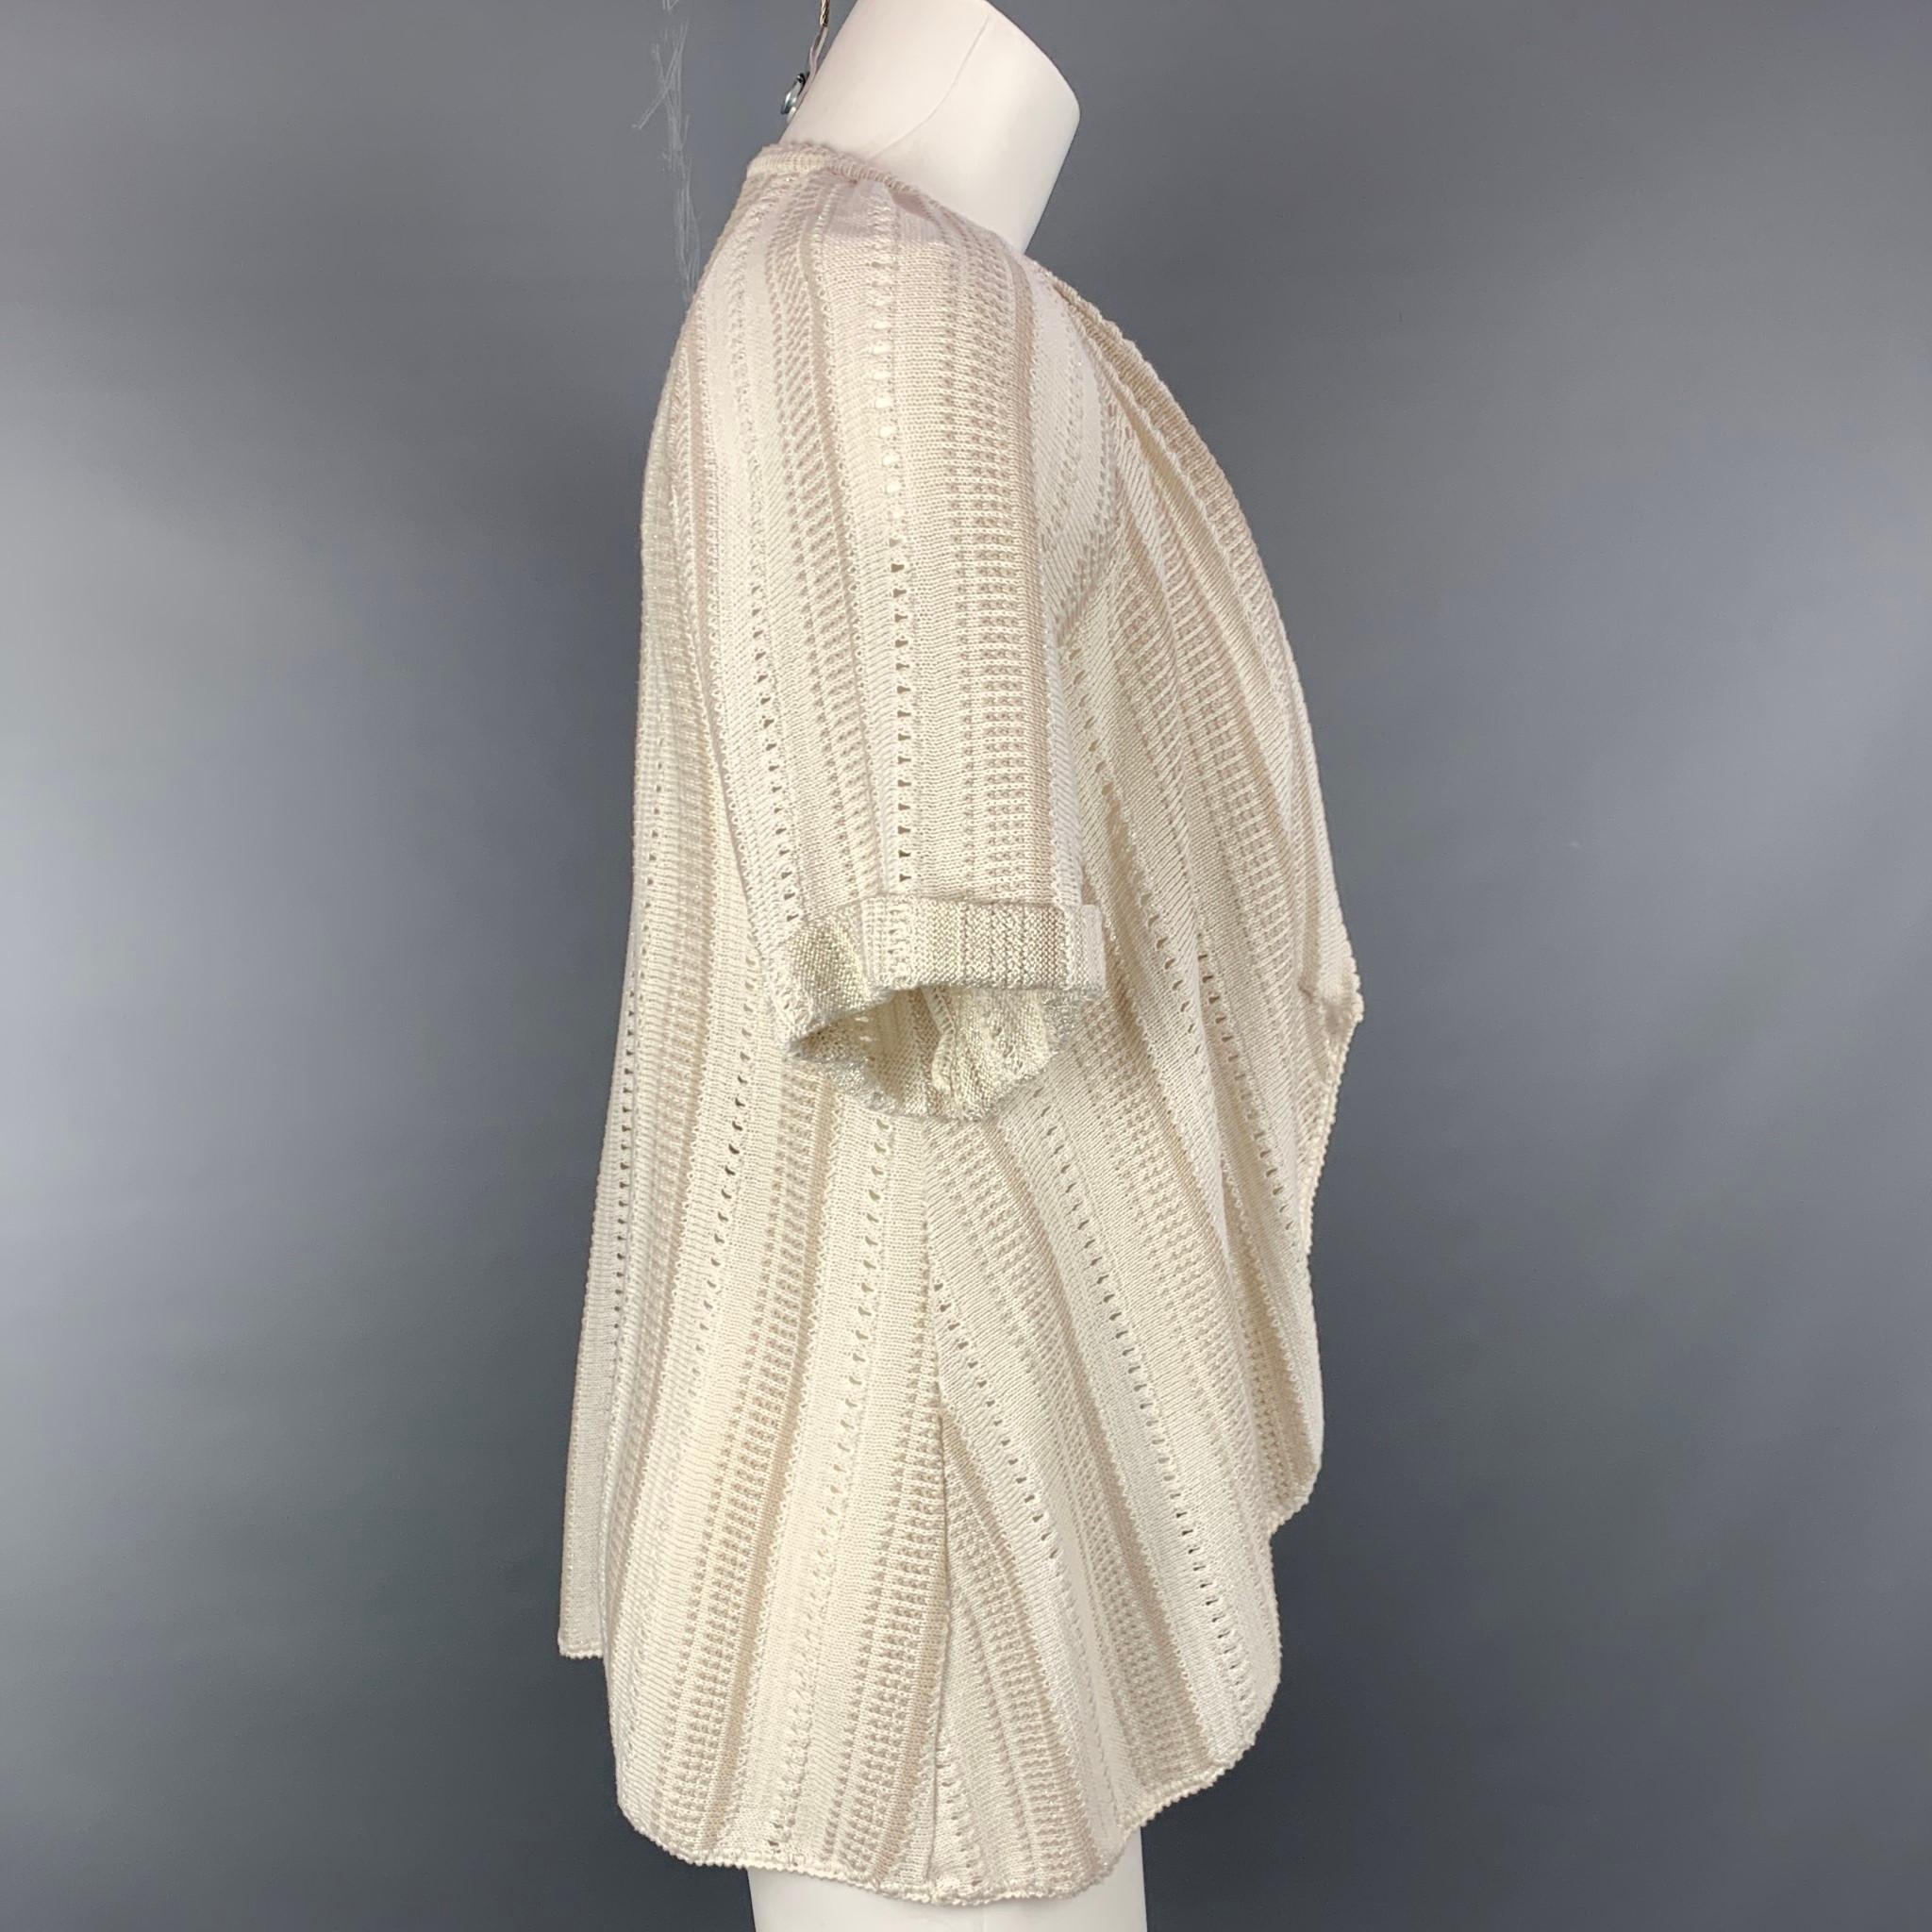 ELIE TAHARI cardigan comes in a beige & silver cotton blend featuring 3/4 cuffed sleeves and a open front.

Very Good Pre-Owned Condition.
Marked: XS

Measurements:

Shoulder: 16 in.
Bust: 36 in.
Sleeve: 9.5 in.
Length: 25.5 in. 